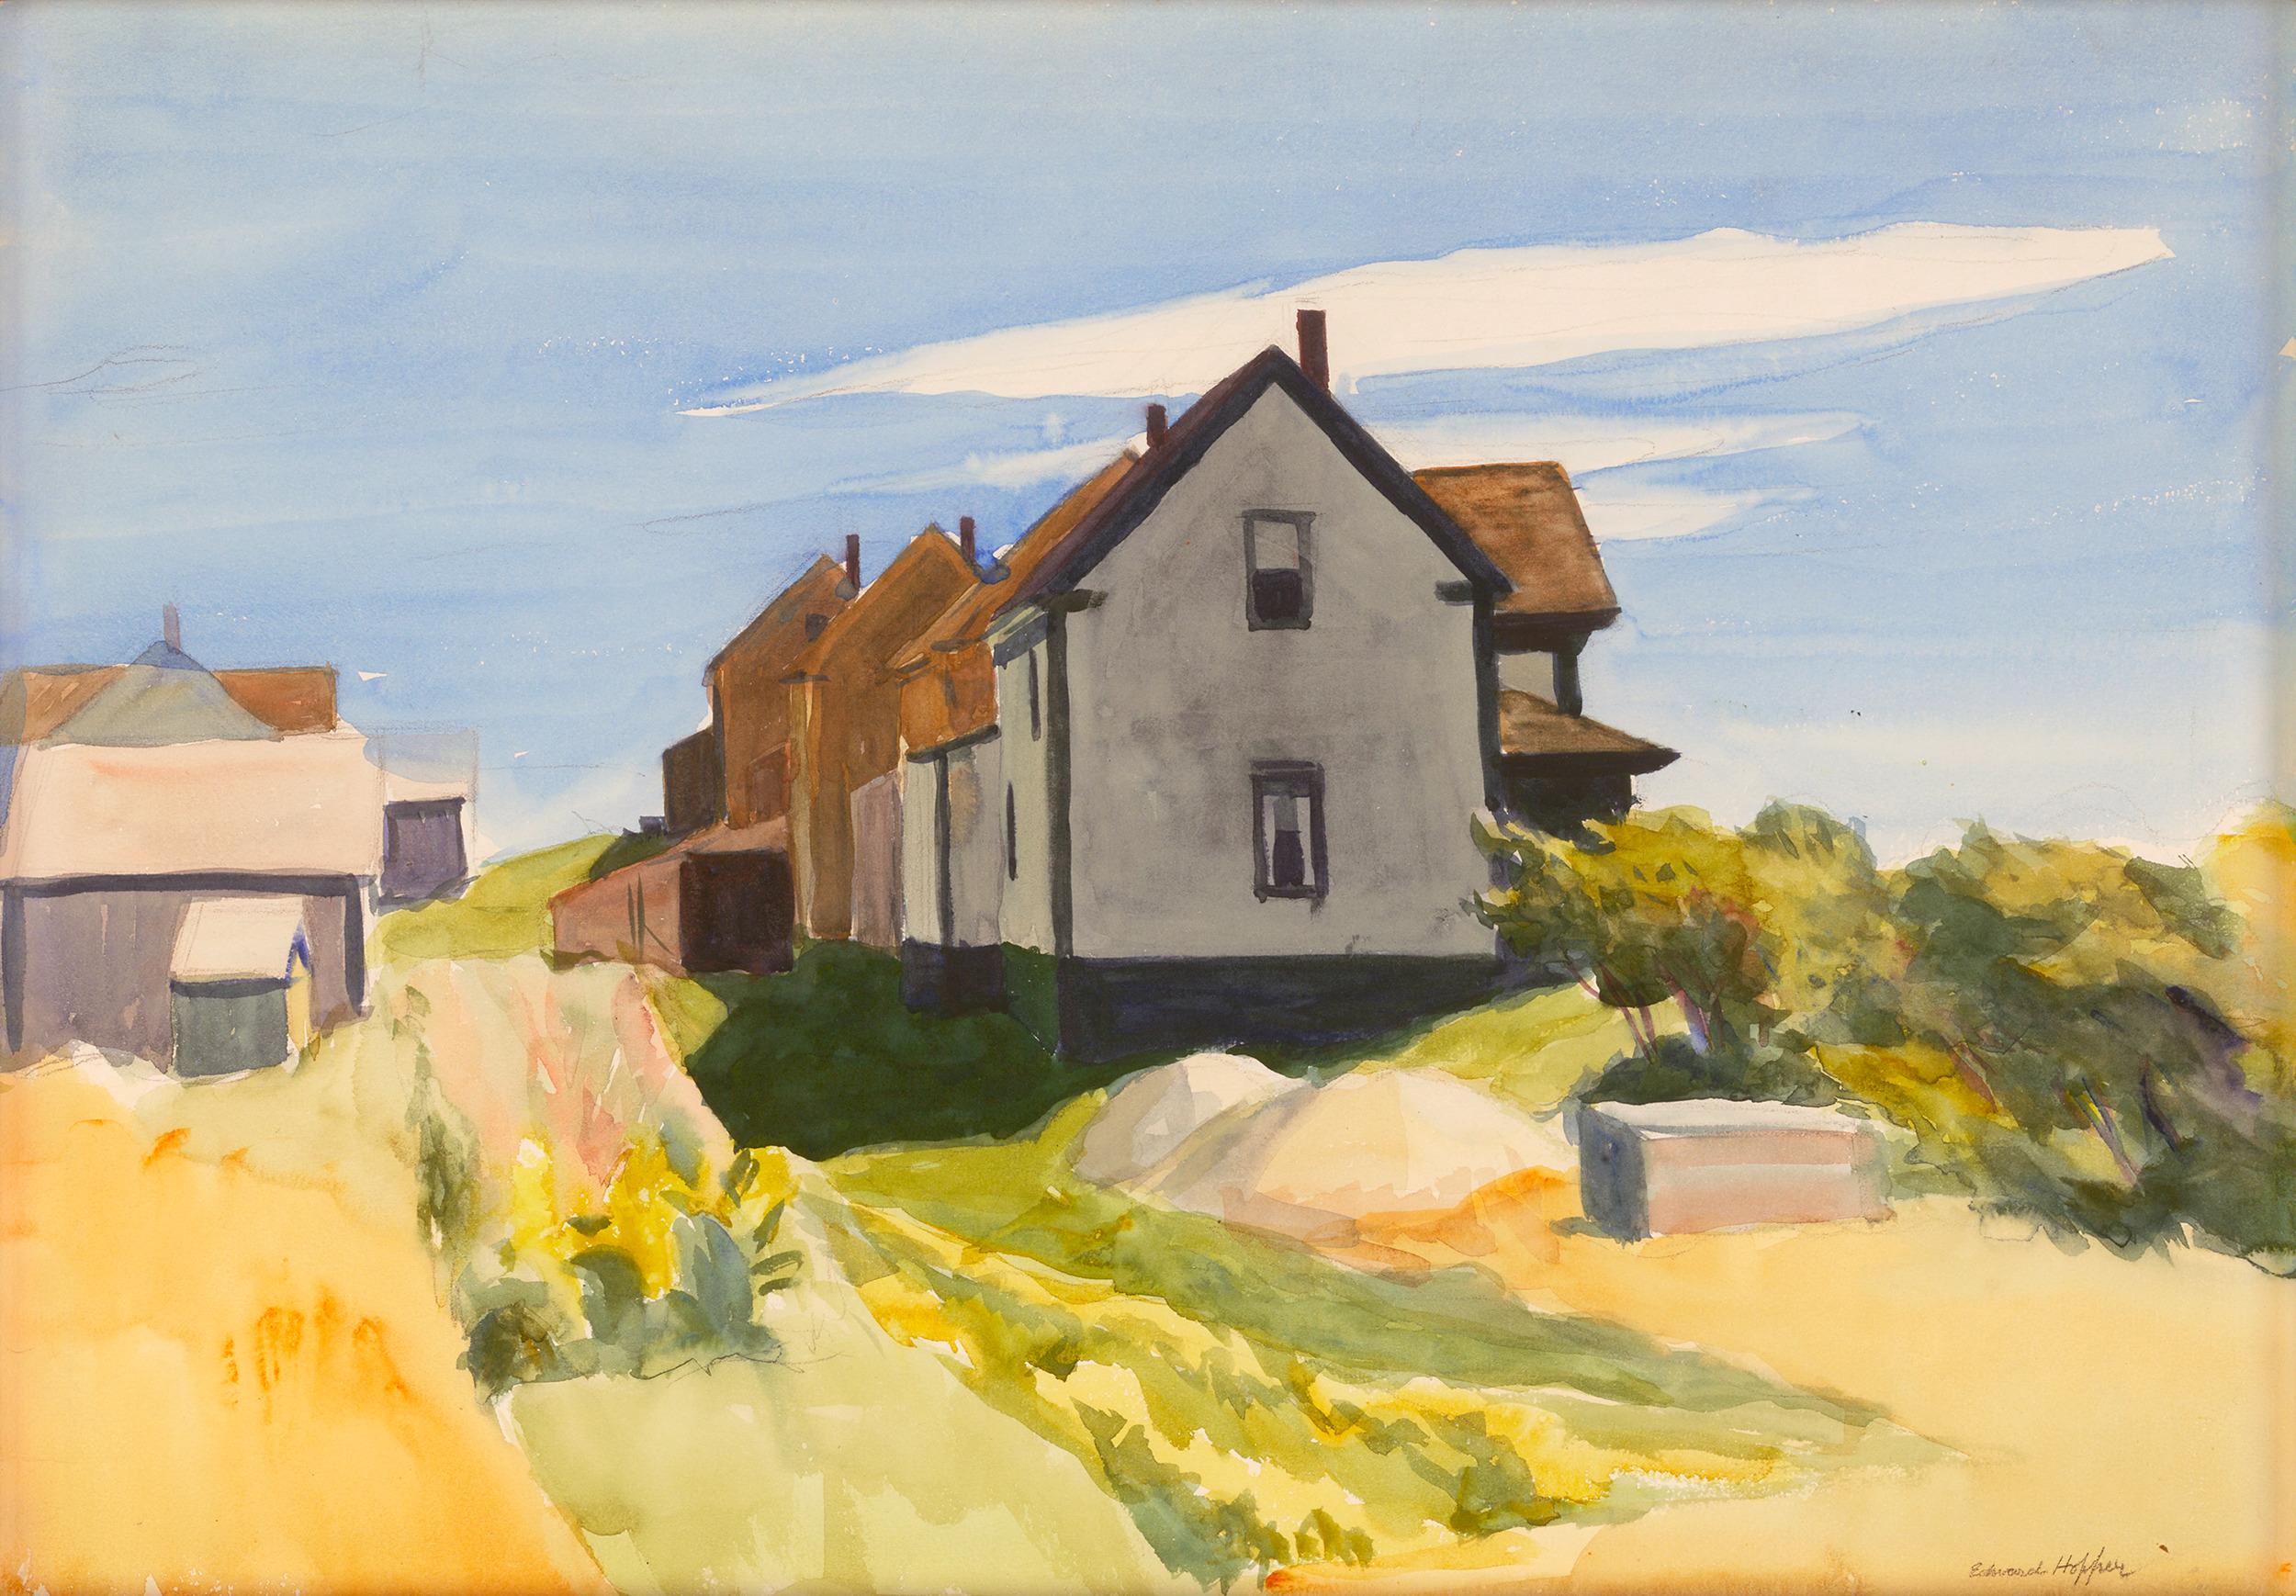 Edward Hopper
1882-1967  American

Group of Houses

Signed “Edward Hopper” (lower right)
Watercolor and pencil on paper

Edward Hopper is unparalleled in his depiction of the American ethos, rendering landscapes and figures with a mastery of light